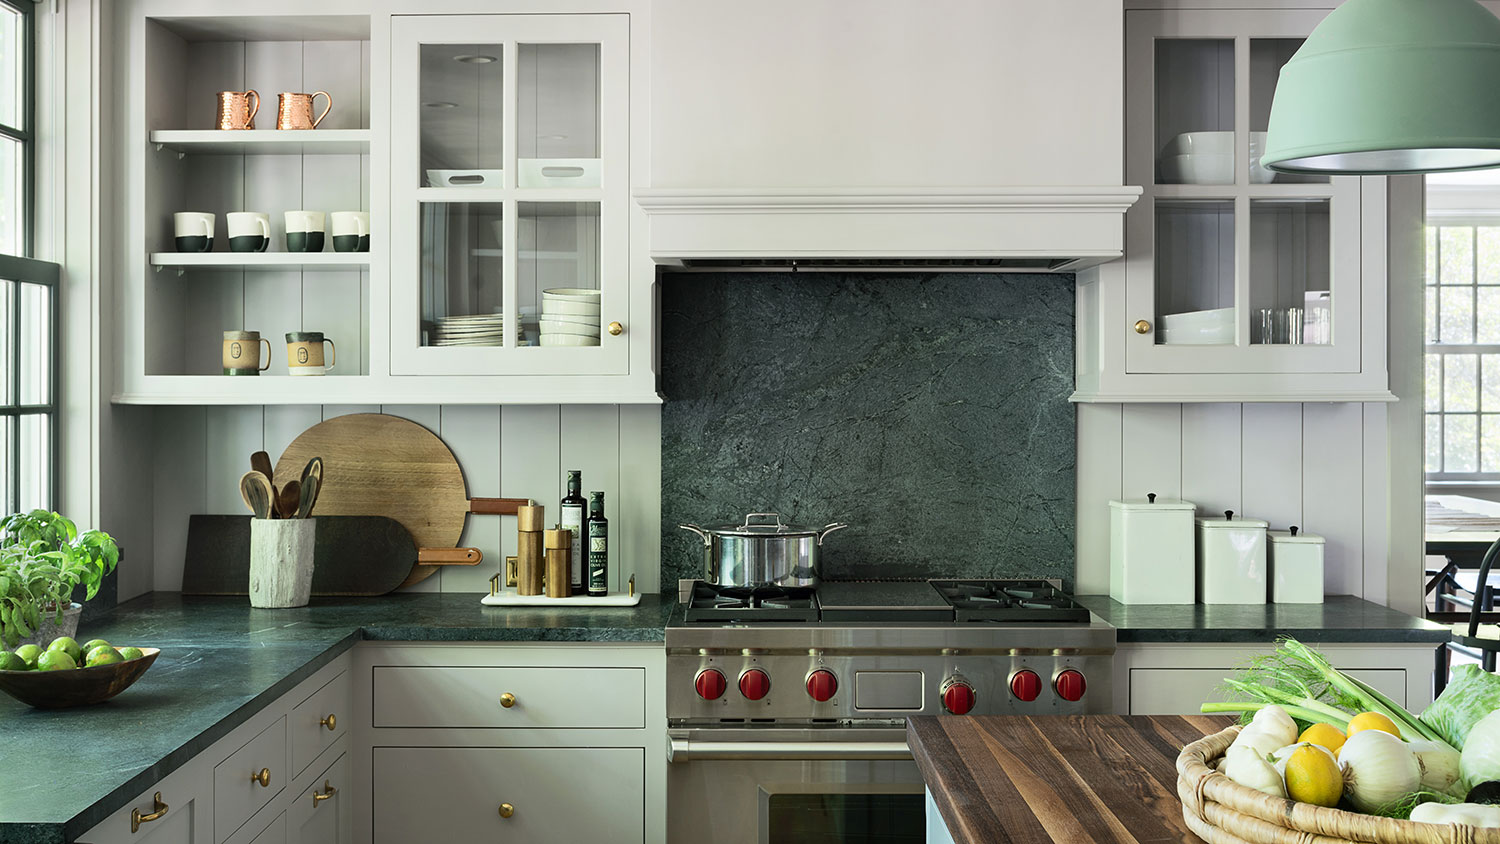 Guide to Choosing and Installing Your Granite Countertops